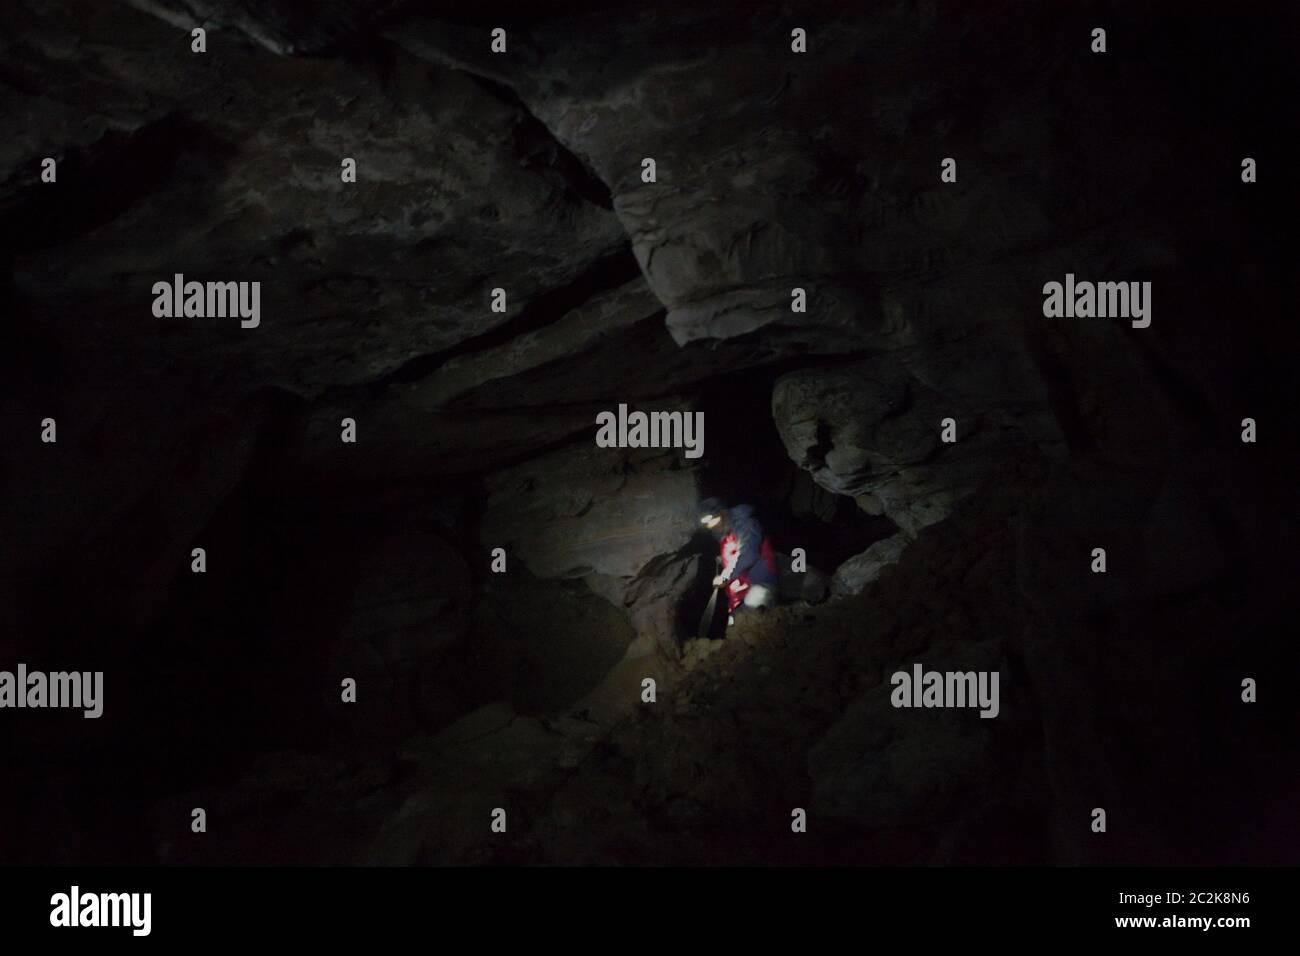 A man moving through the underground cave system of Kalong (bat) Cave in Tangkahan, North Sumatra, Indonesia. Stock Photo